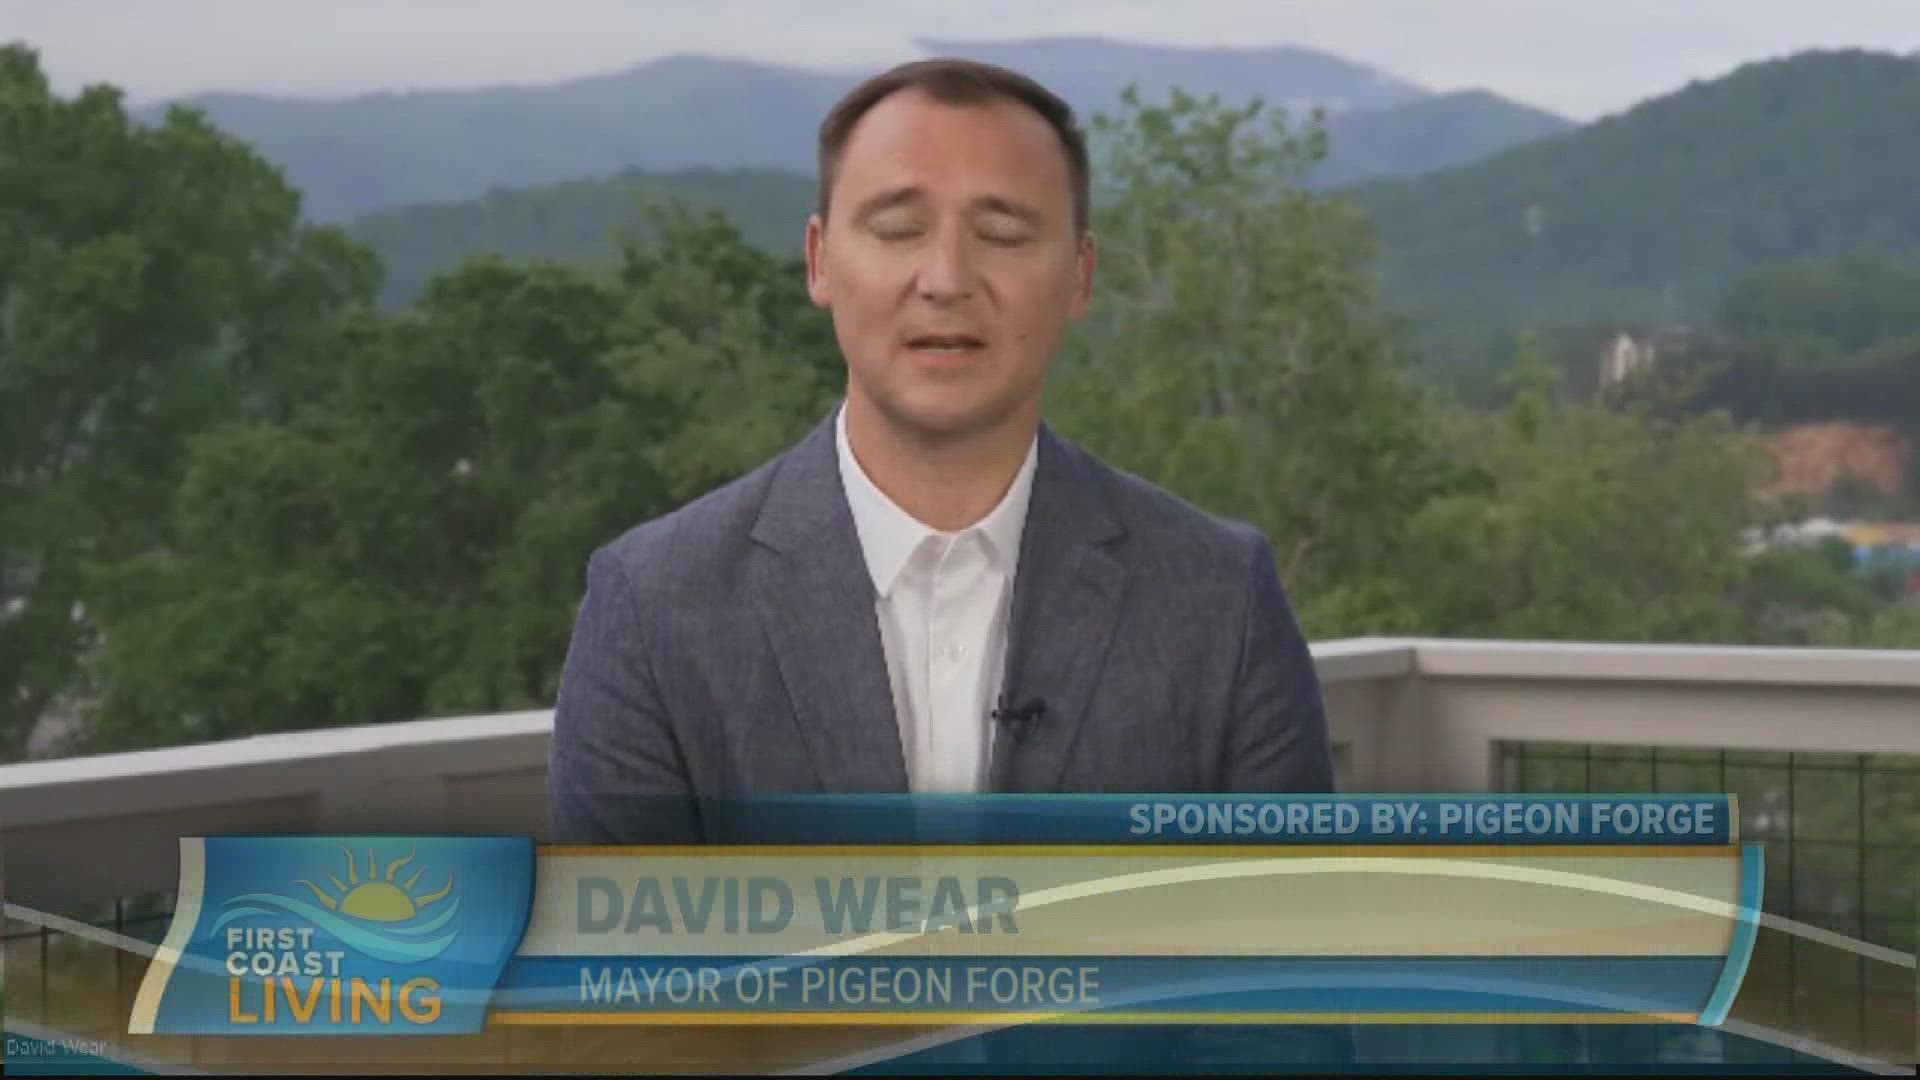 The Mayor of Pigeon Forge, David Wear shares his favorite family-friendly getaway and reveals new attractions for 2022.